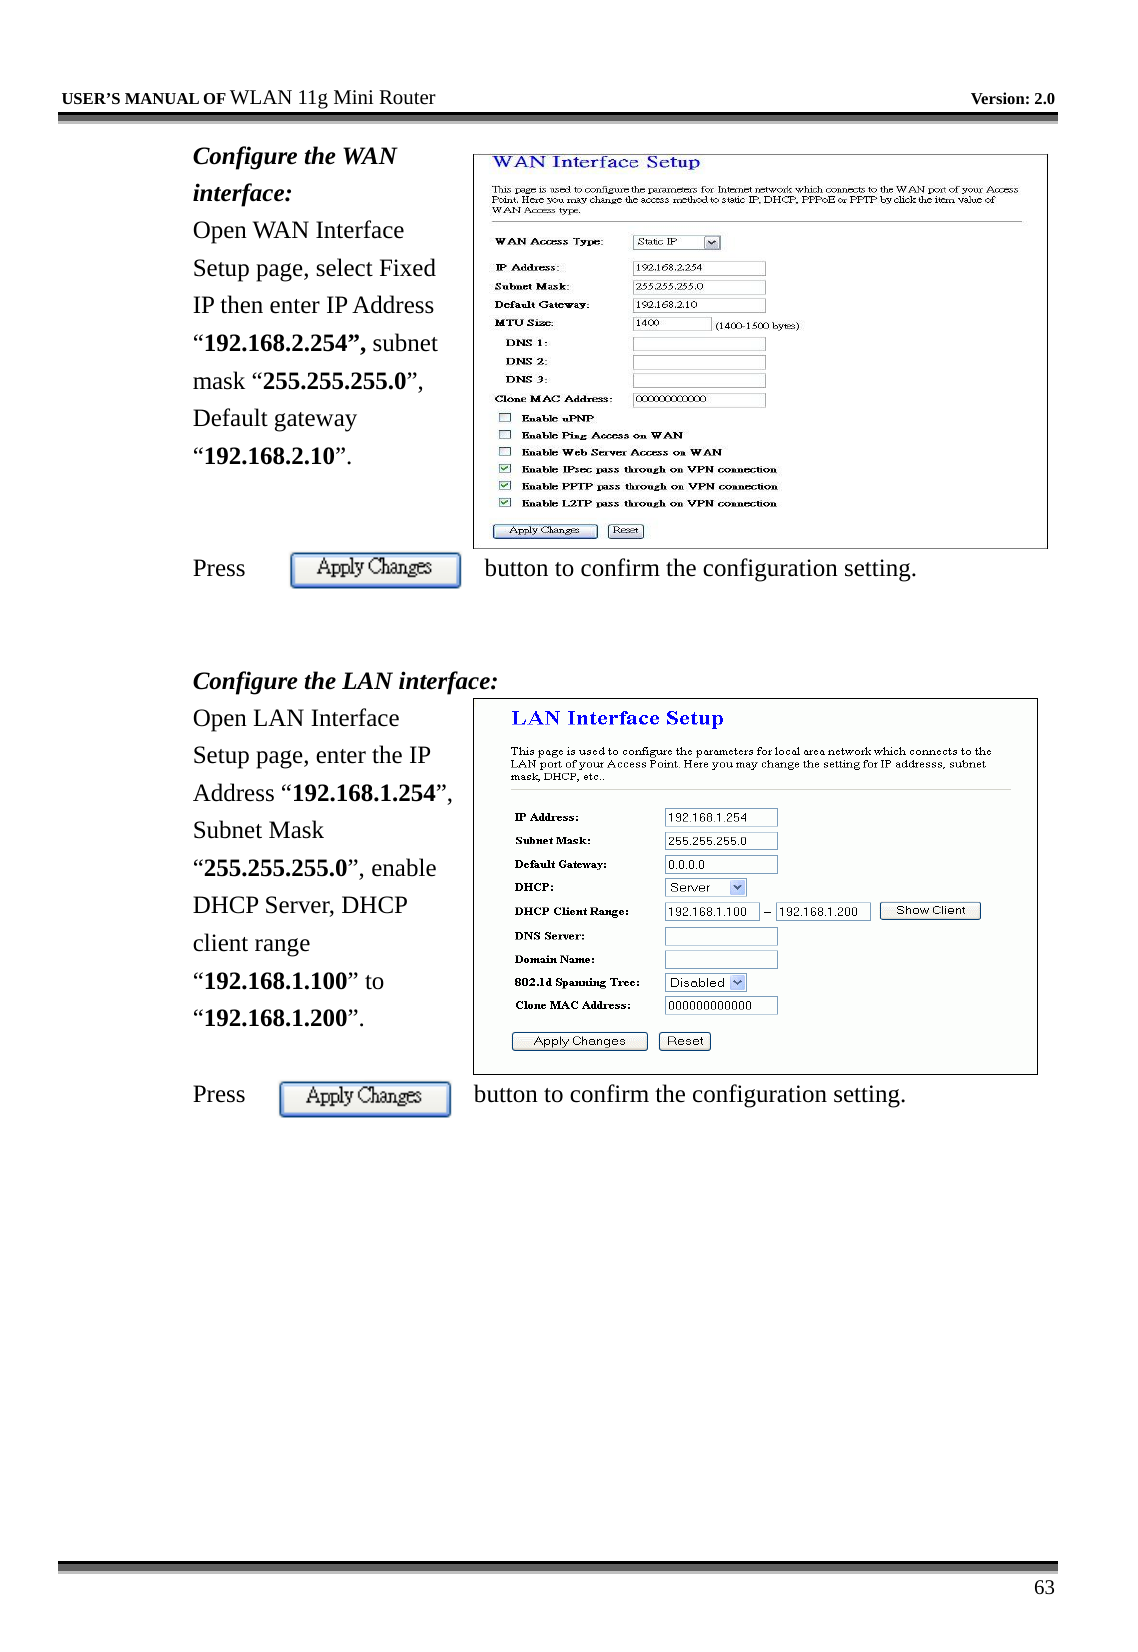   USER’S MANUAL OF WLAN 11g Mini Router   Version: 2.0     63 Configure the WAN interface: Open WAN Interface Setup page, select Fixed IP then enter IP Address “192.168.2.254”, subnet mask “255.255.255.0”, Default gateway “192.168.2.10”.   Press  button to confirm the configuration setting.   Configure the LAN interface:  Open LAN Interface Setup page, enter the IP Address “192.168.1.254”, Subnet Mask “255.255.255.0”, enable DHCP Server, DHCP client range “192.168.1.100” to “192.168.1.200”.   Press  button to confirm the configuration setting.   